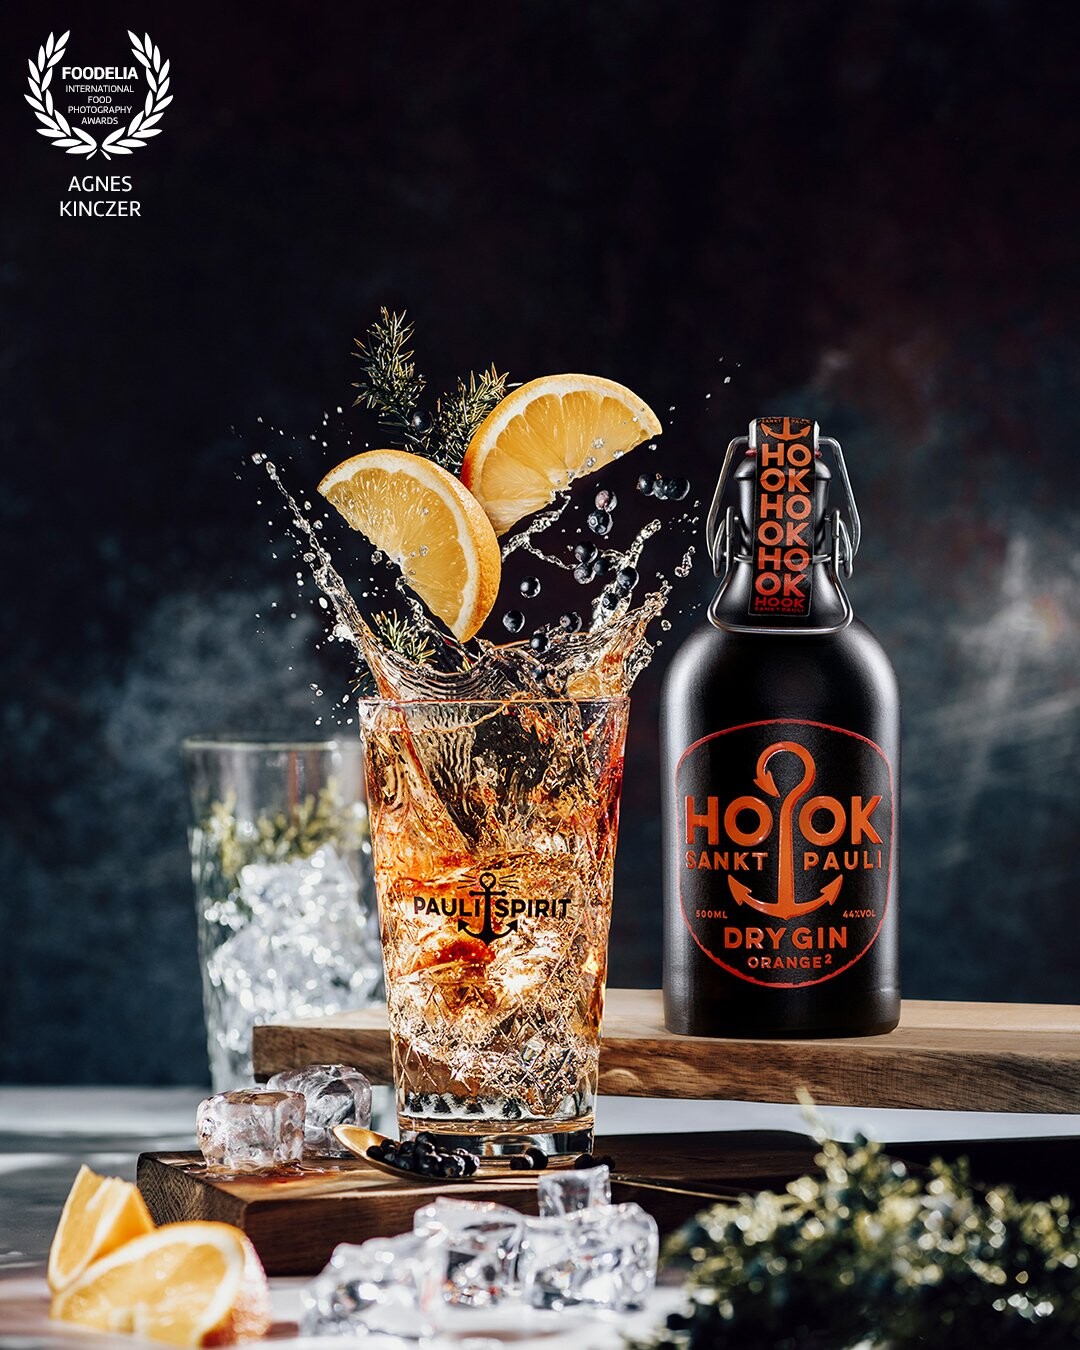 Based on a concept developed together with the client, the aim was to visualize the flavours and freshness of the drink, at the same time highlighting the product. Part of an advertisement campaign.